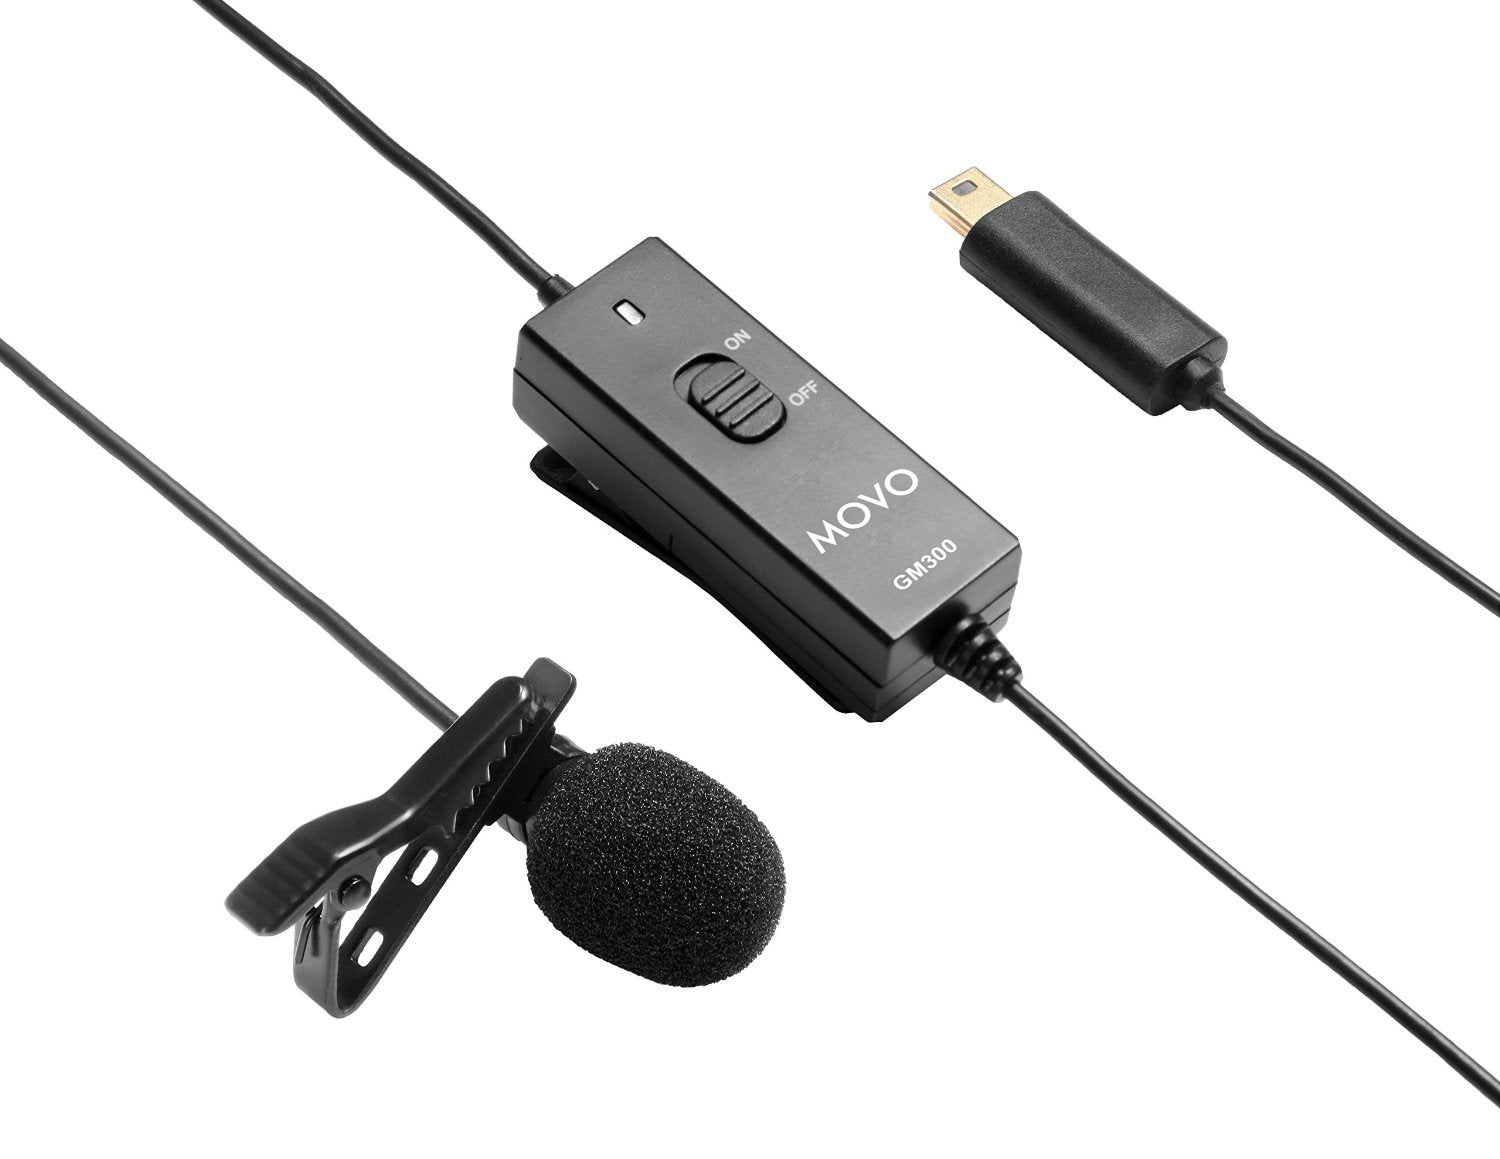 Movo GM300 Lavalier GoPro Microphone - Omnidirectional Lavalier Microphone Compatible with GoPro HERO3, HERO3+ and HERO4 Black, White and Silver Editions (9-Foot Cord)  - Like New